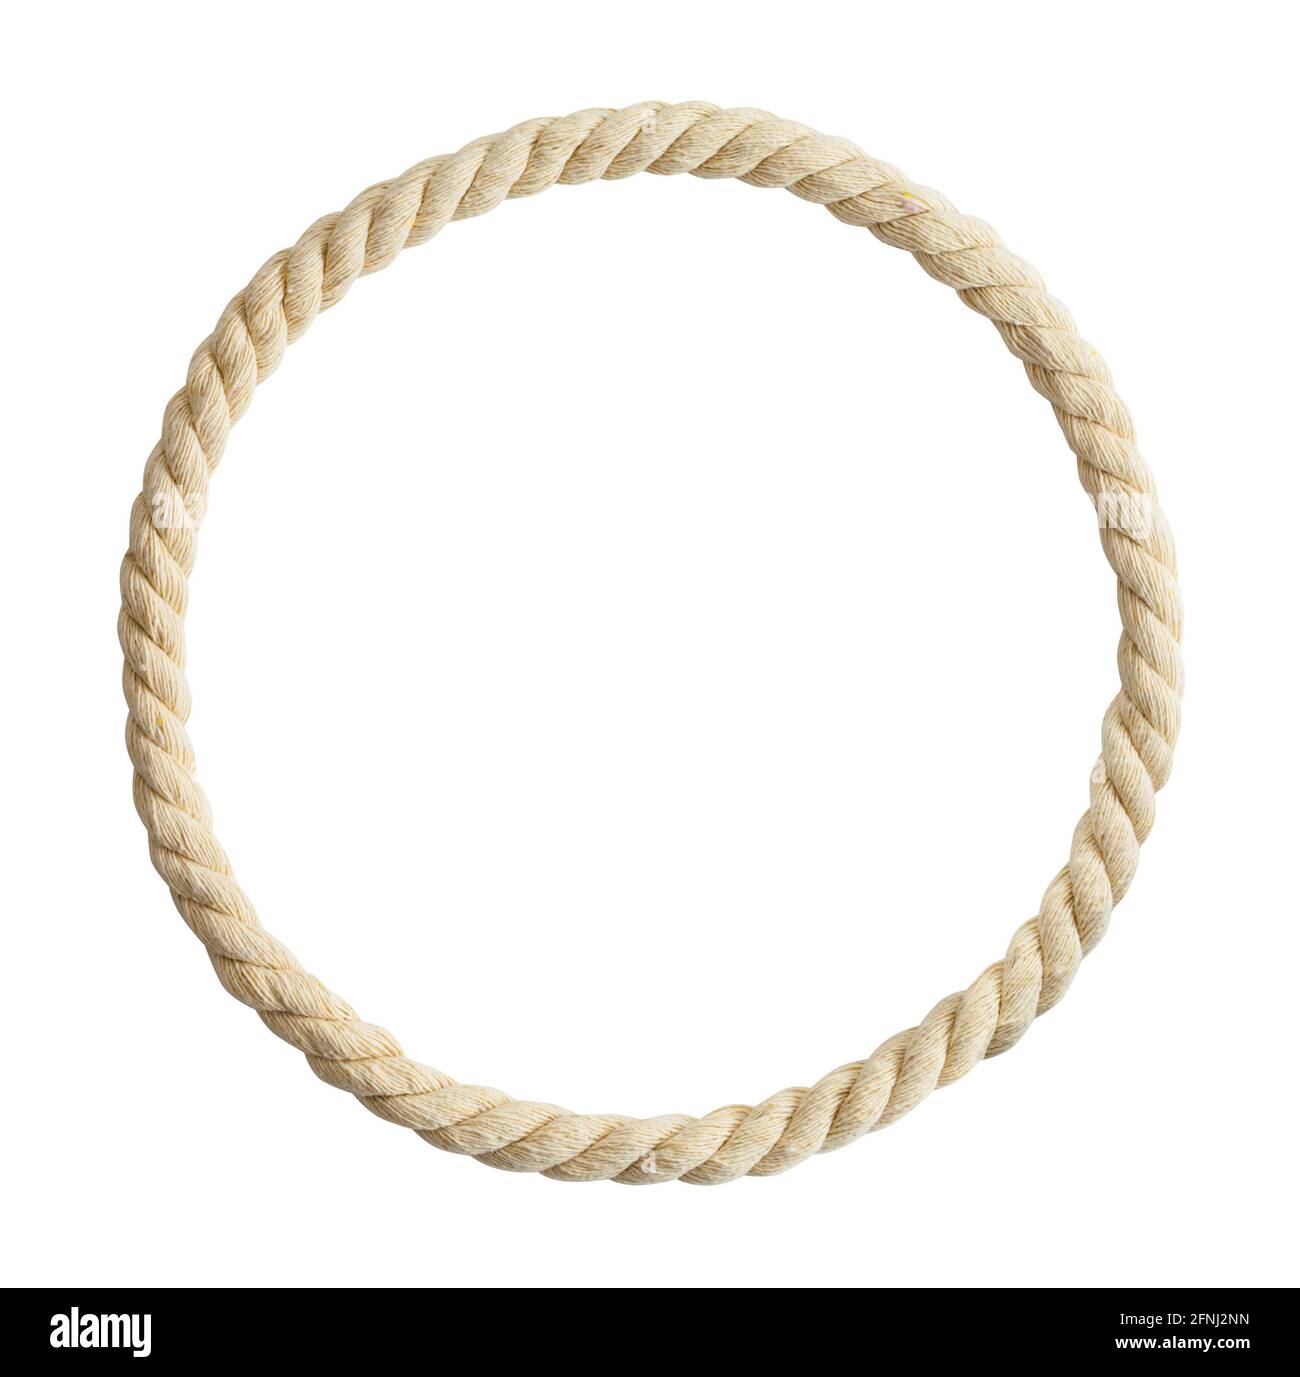 Twisted Hemp Rope in a Circle Frame Cut Out. Stock Photo